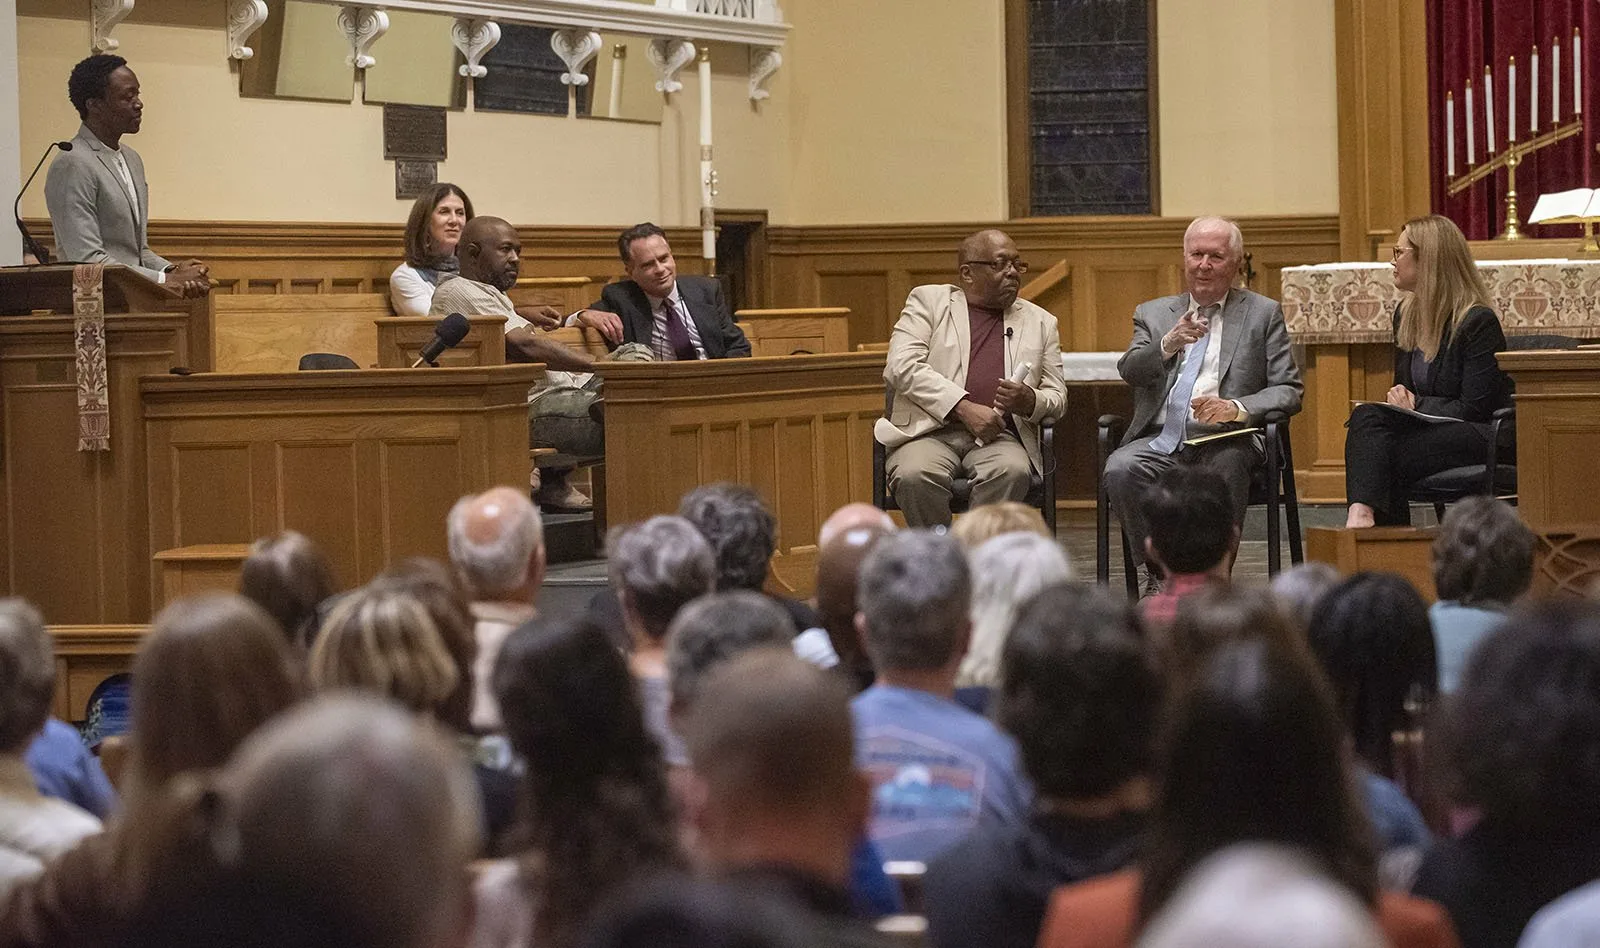 Greater Birmingham Ministries Executive Director Scott Douglas, former Alabama Attorney General Bill Baxley, and Earwitness podcast host Beth Shelburne at April 16, 2023 event in support of Toforest Johnson, Highlands United Methodist Chruch in Birmingham. (Image: Bernard Troncale)